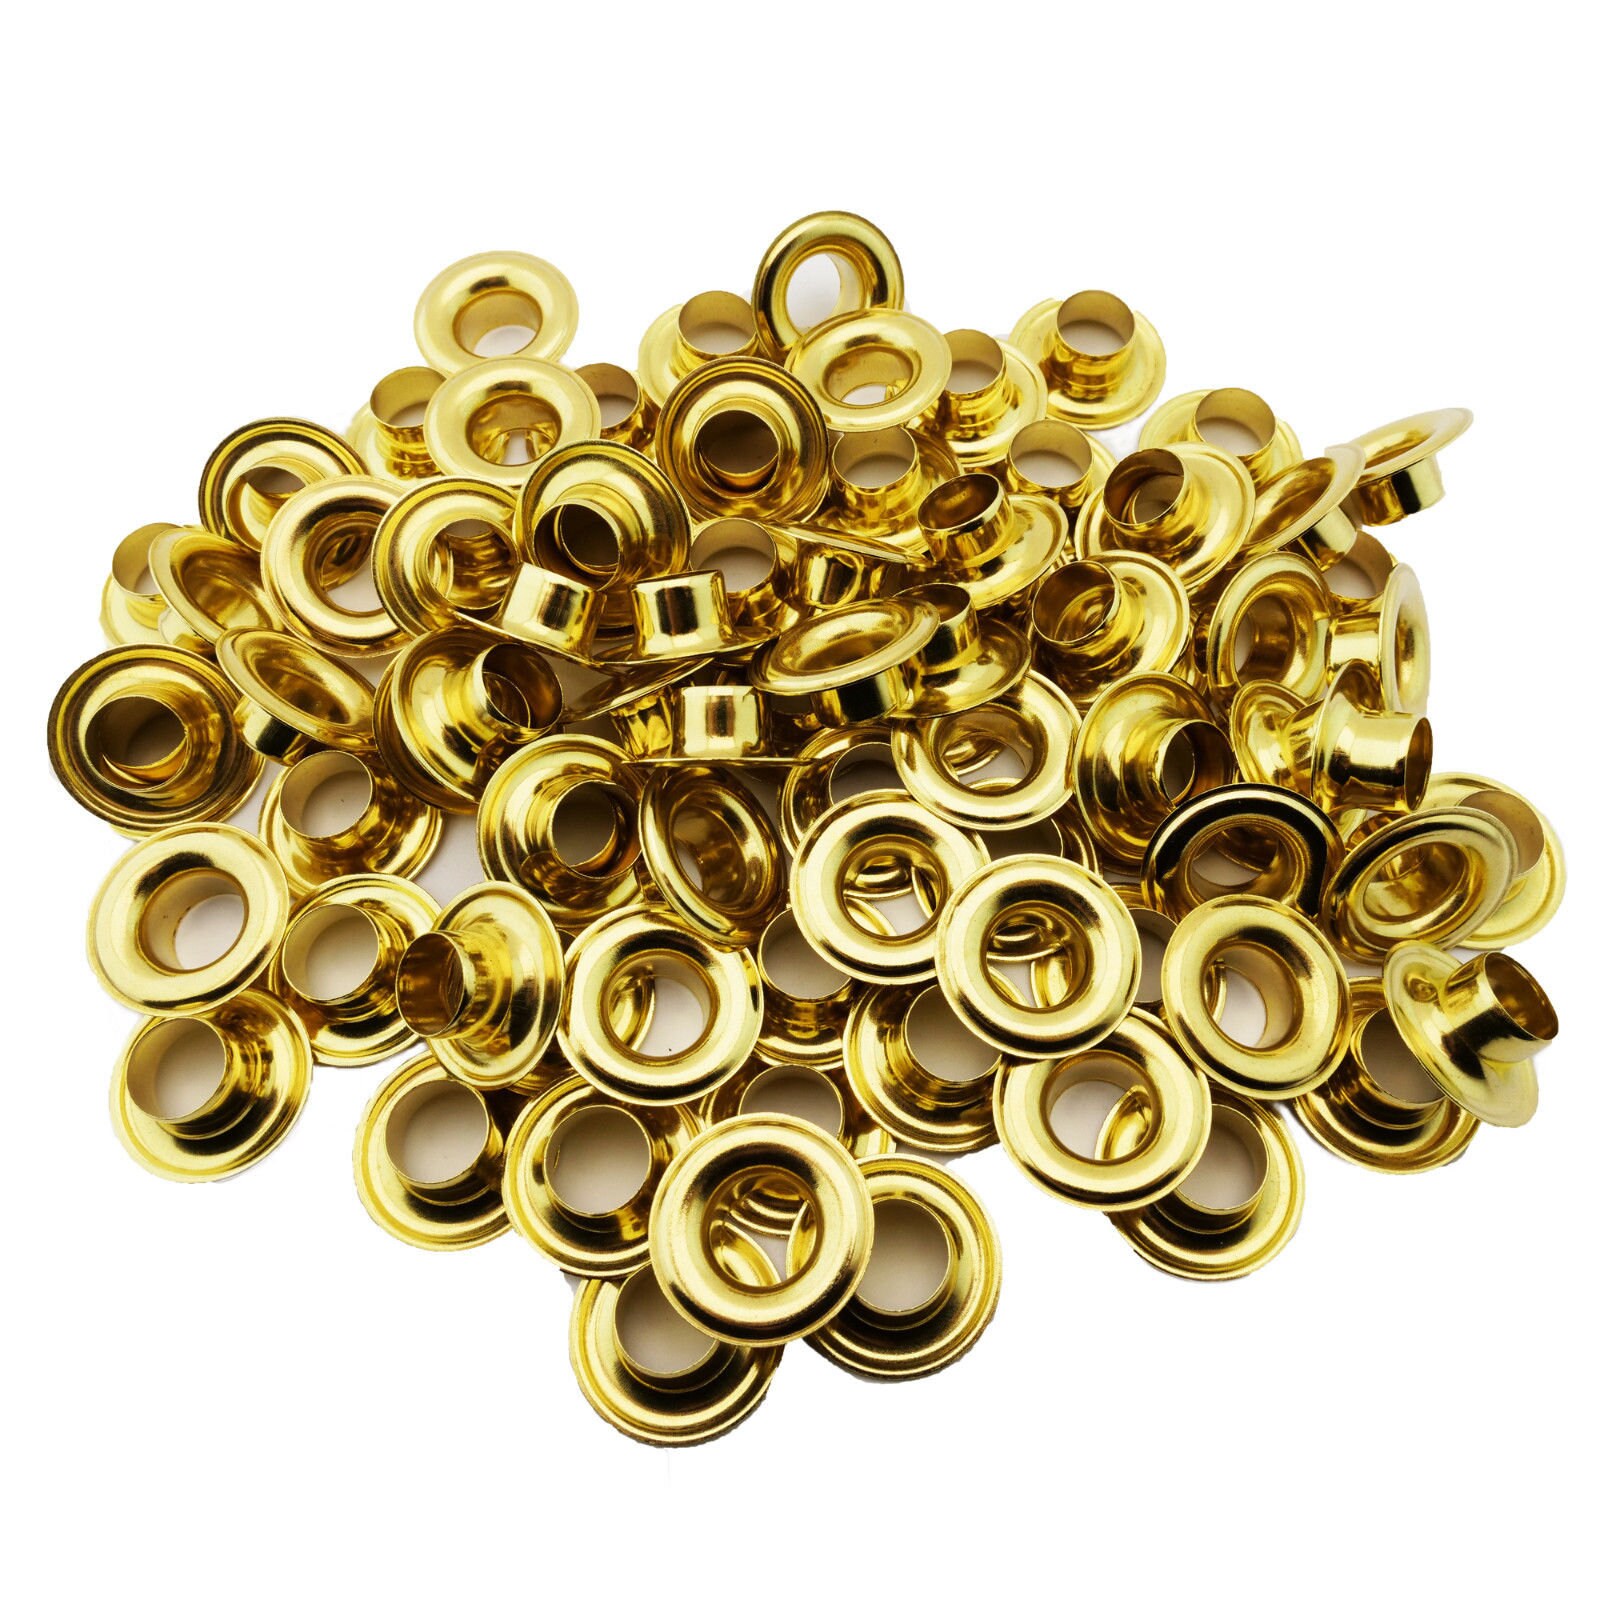 100pc. Large #12 (1.5 Hole) Antique Brass Curtain Grommets with